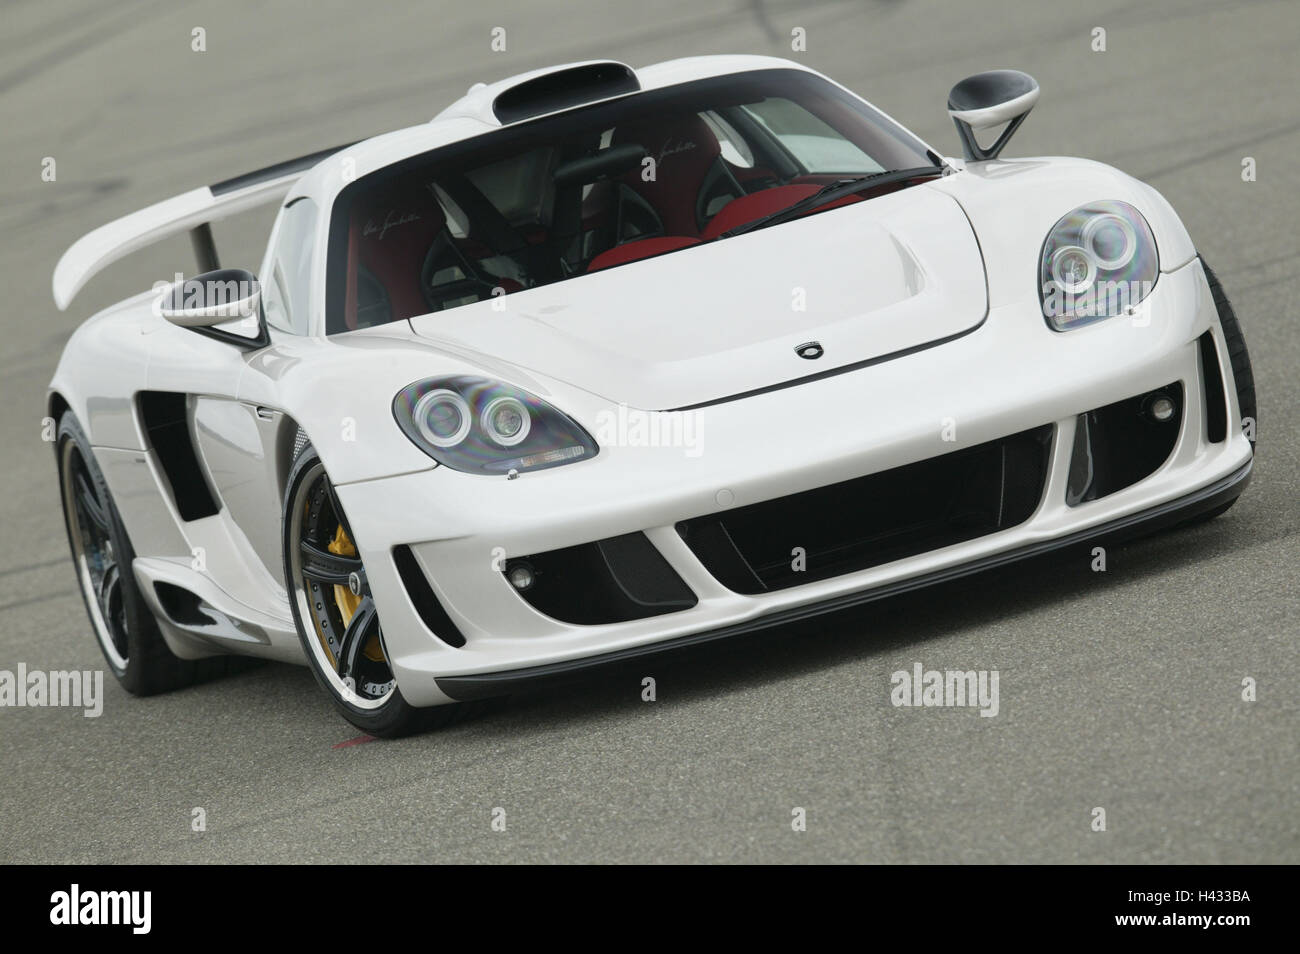 Gemballa Porsche 'Mirage GT', white, aslant from the front Stock Photo